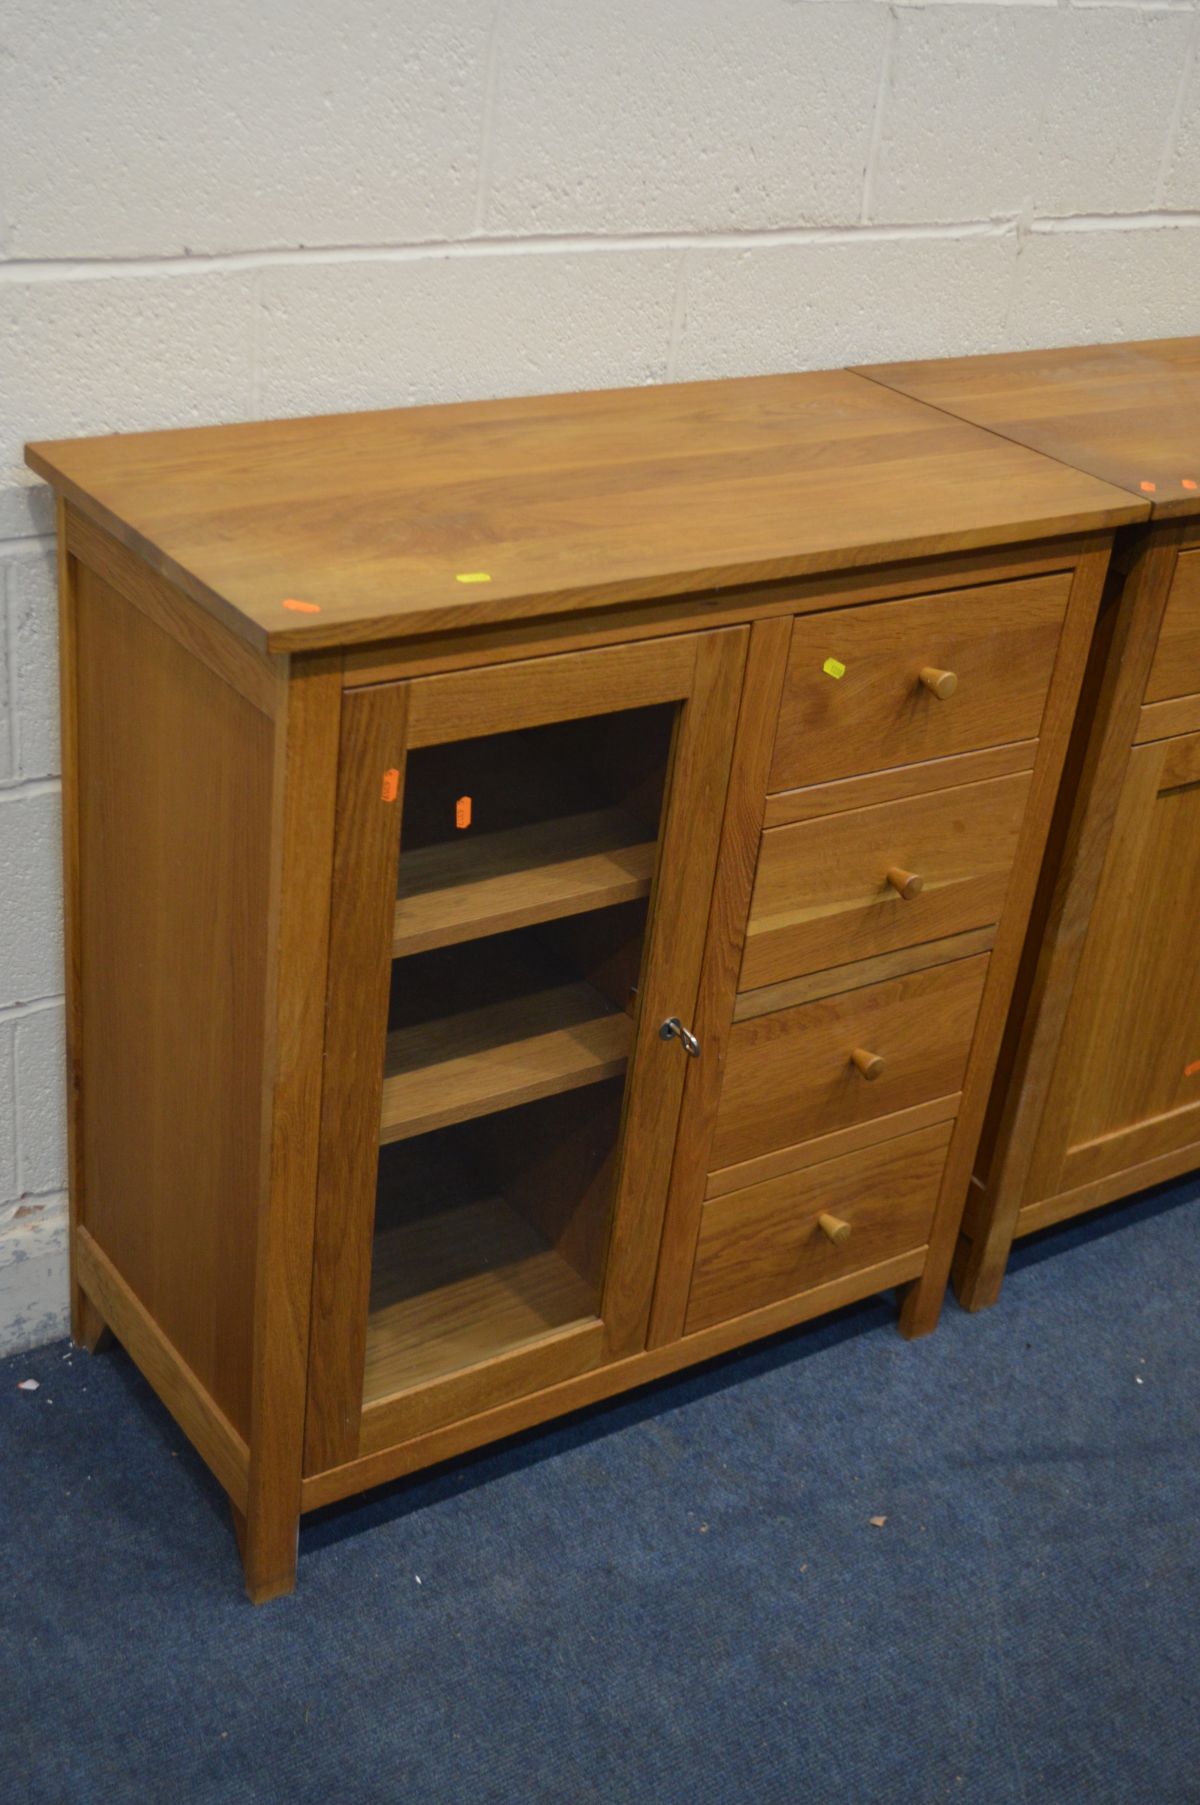 A GOLDEN OAK SIDEBOARD, with three drawers, by Corndell furniture ltd, width 119cm x depth 43cm x - Image 3 of 3